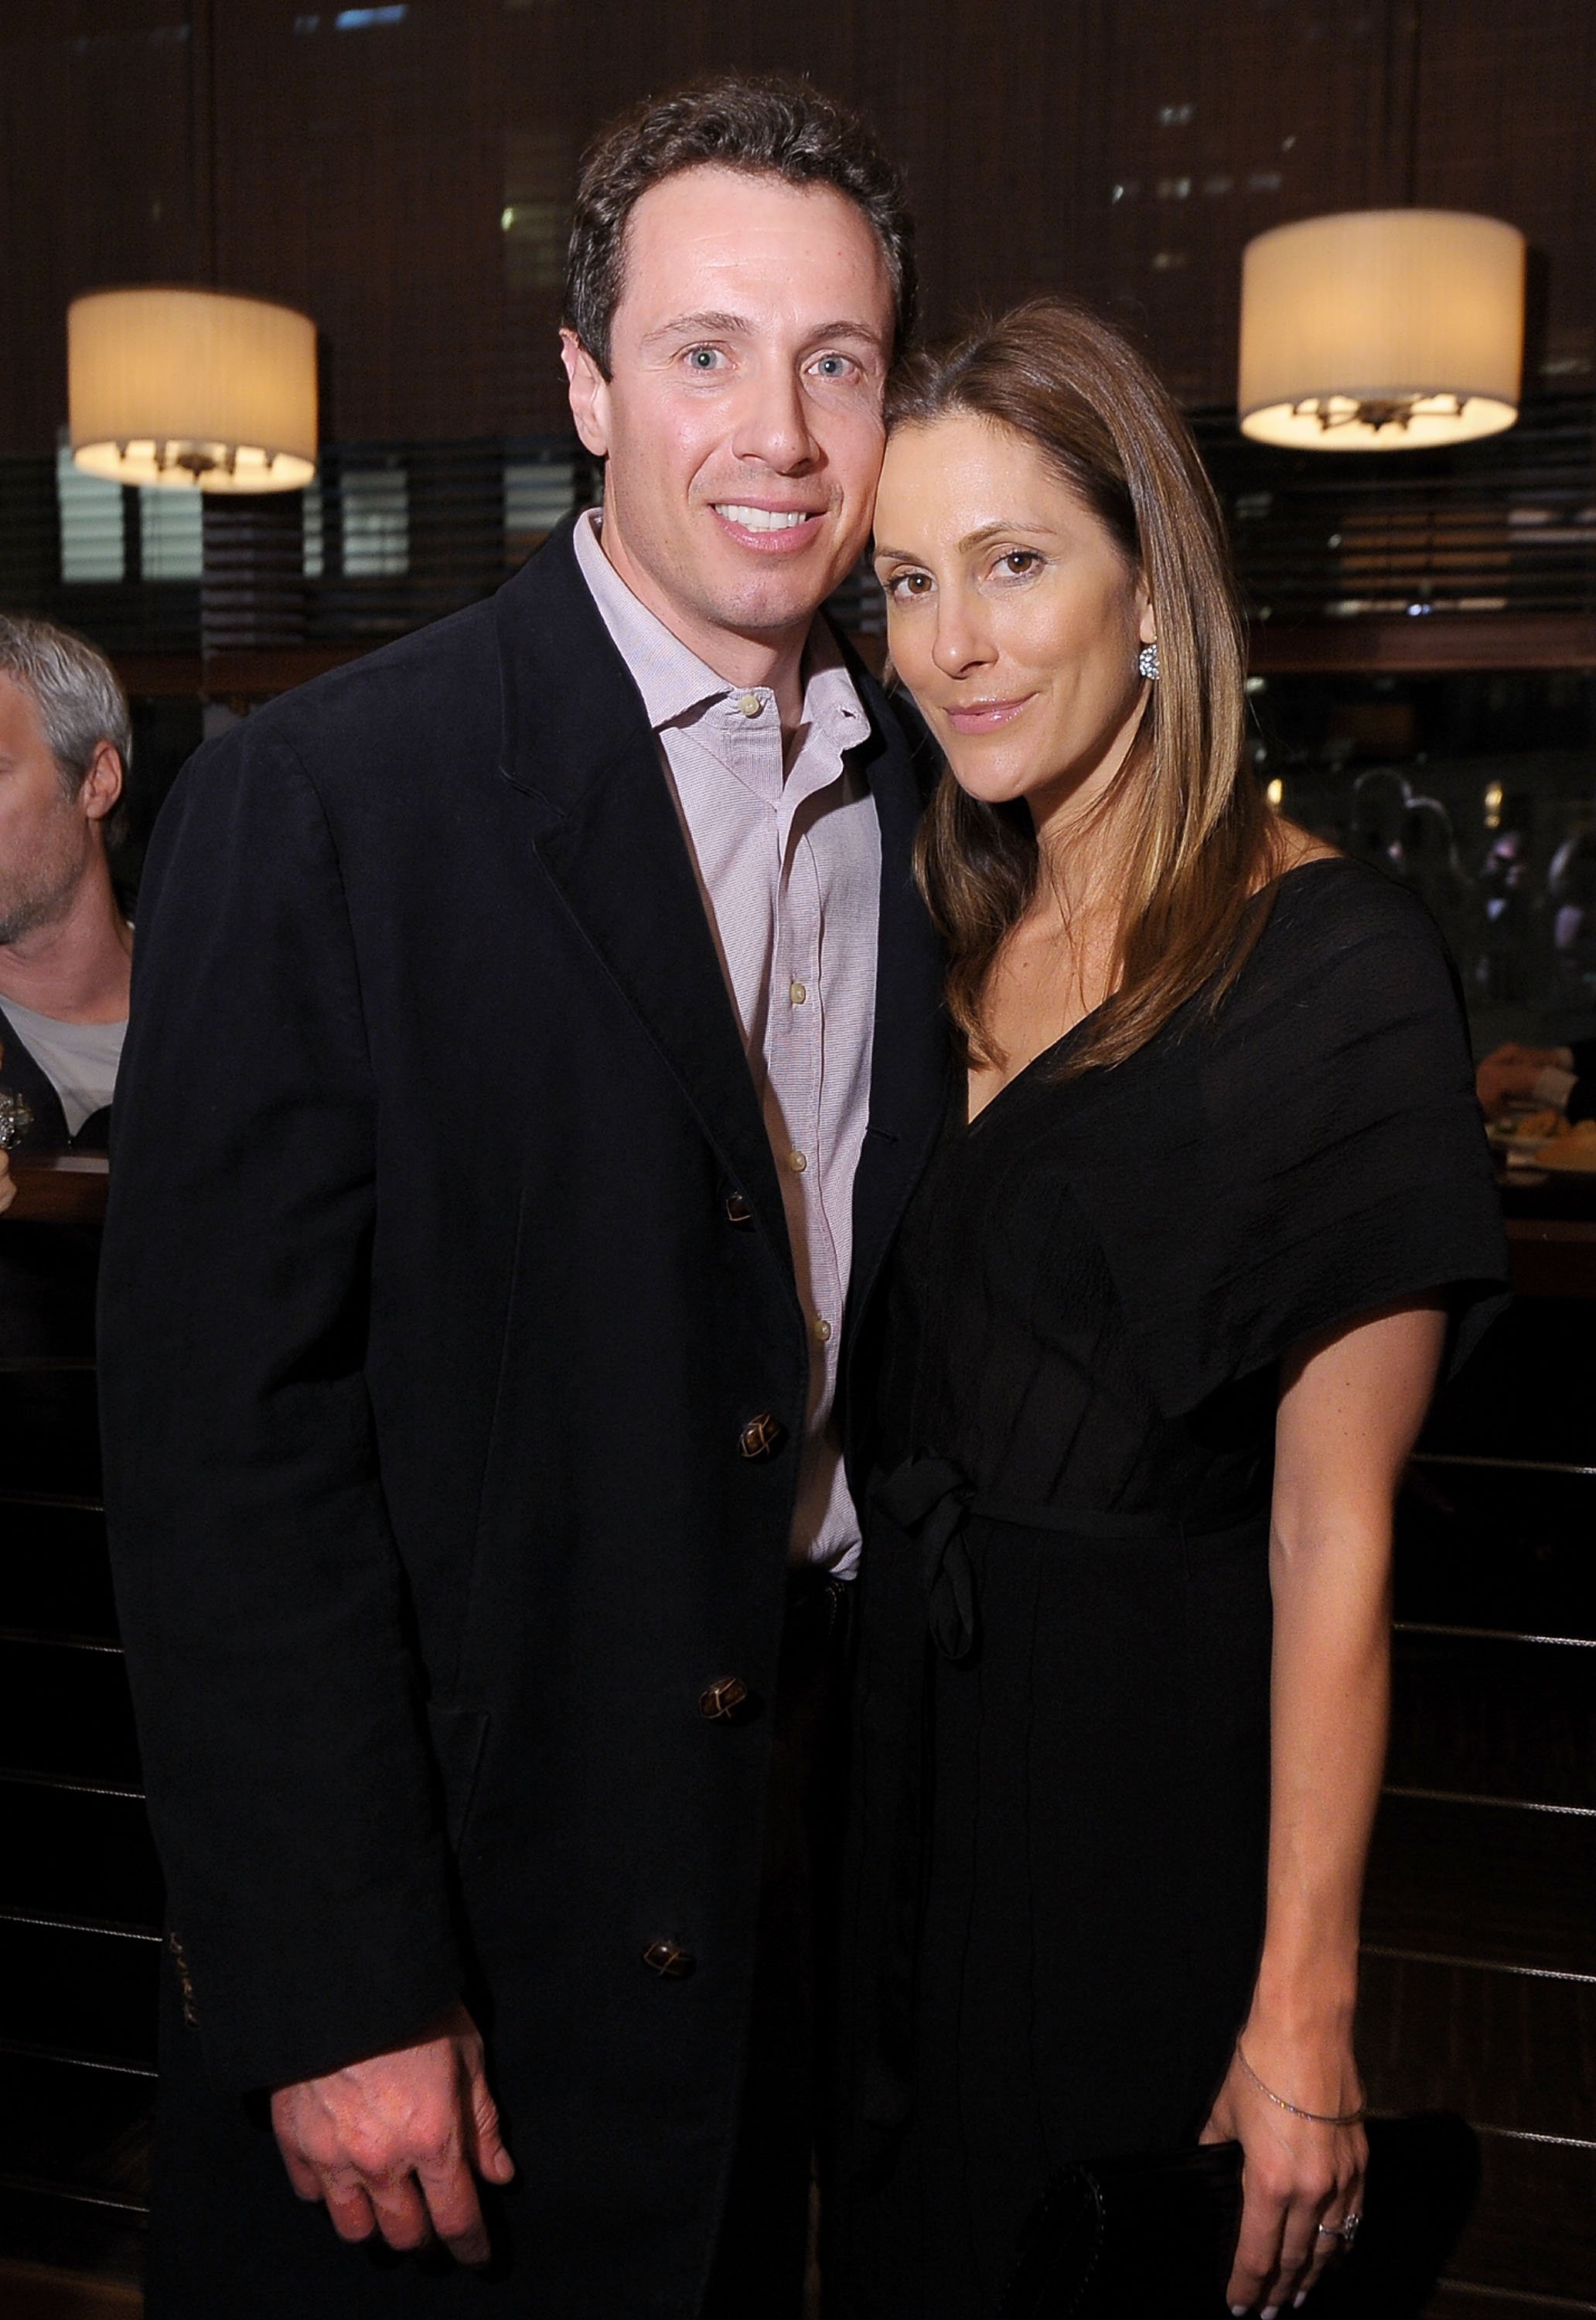 Chris Cuomo and wife, Cristina Greeven, at the HBO documentary screening of "His Way" on March 30, 2011, in New York City  | Photo: GettyImages